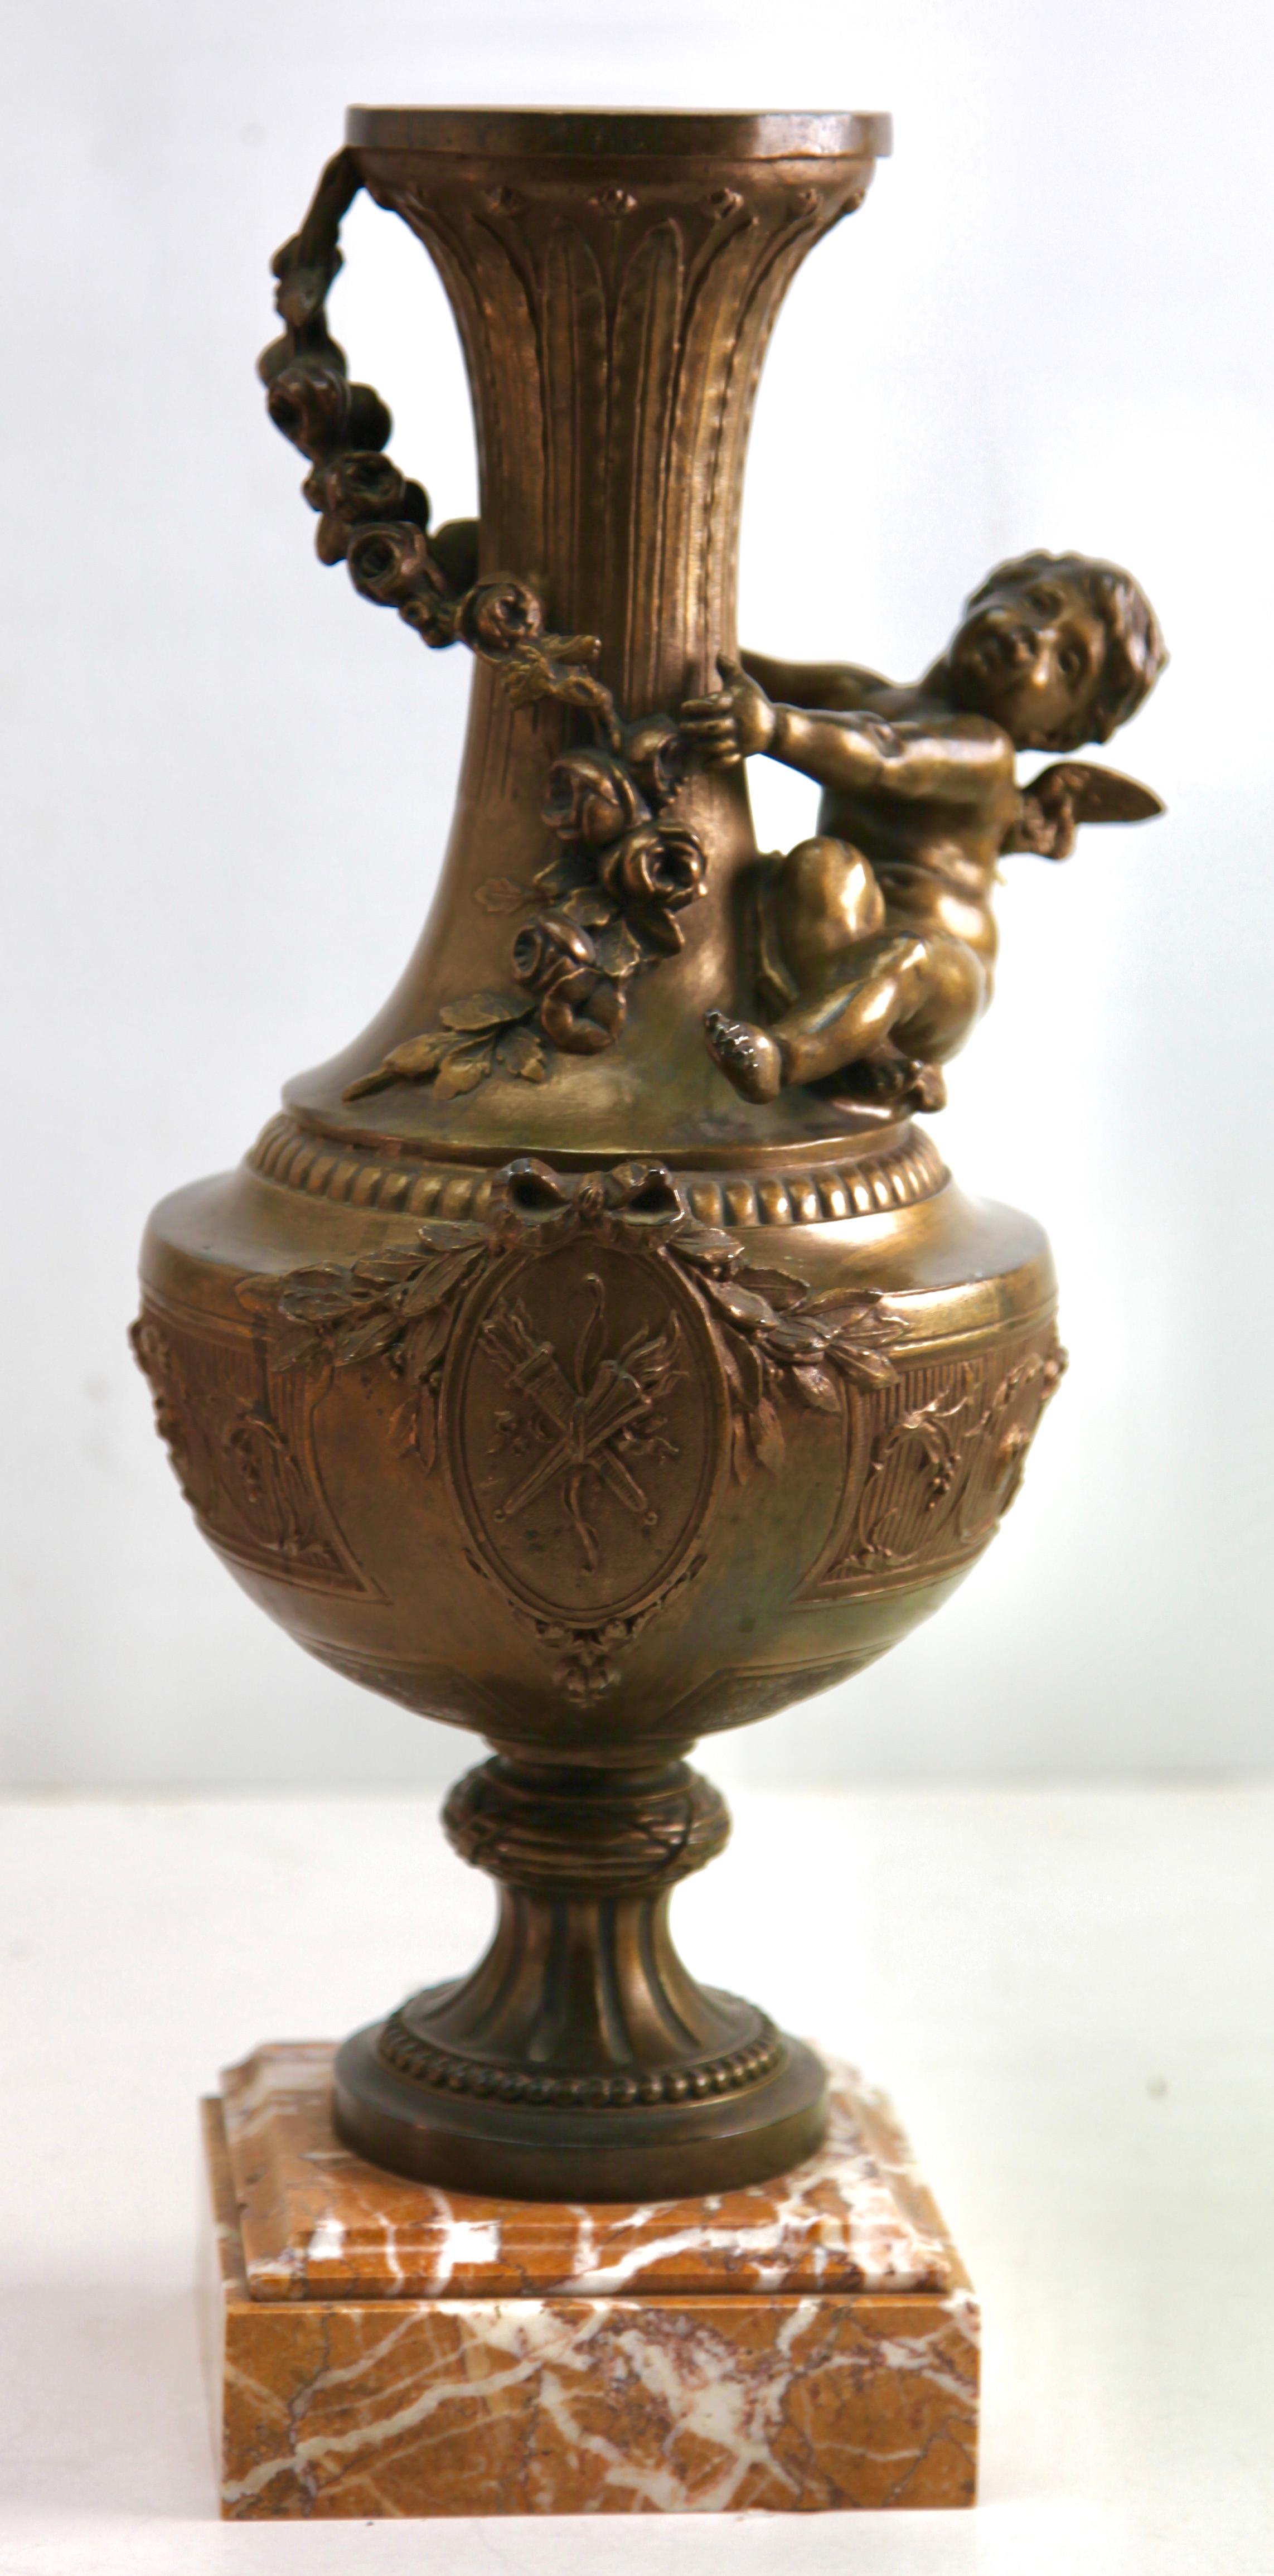 Early 20th Century Pair of Ornamented Vases or Lamps with Little Angels and Richly Decorated For Sale